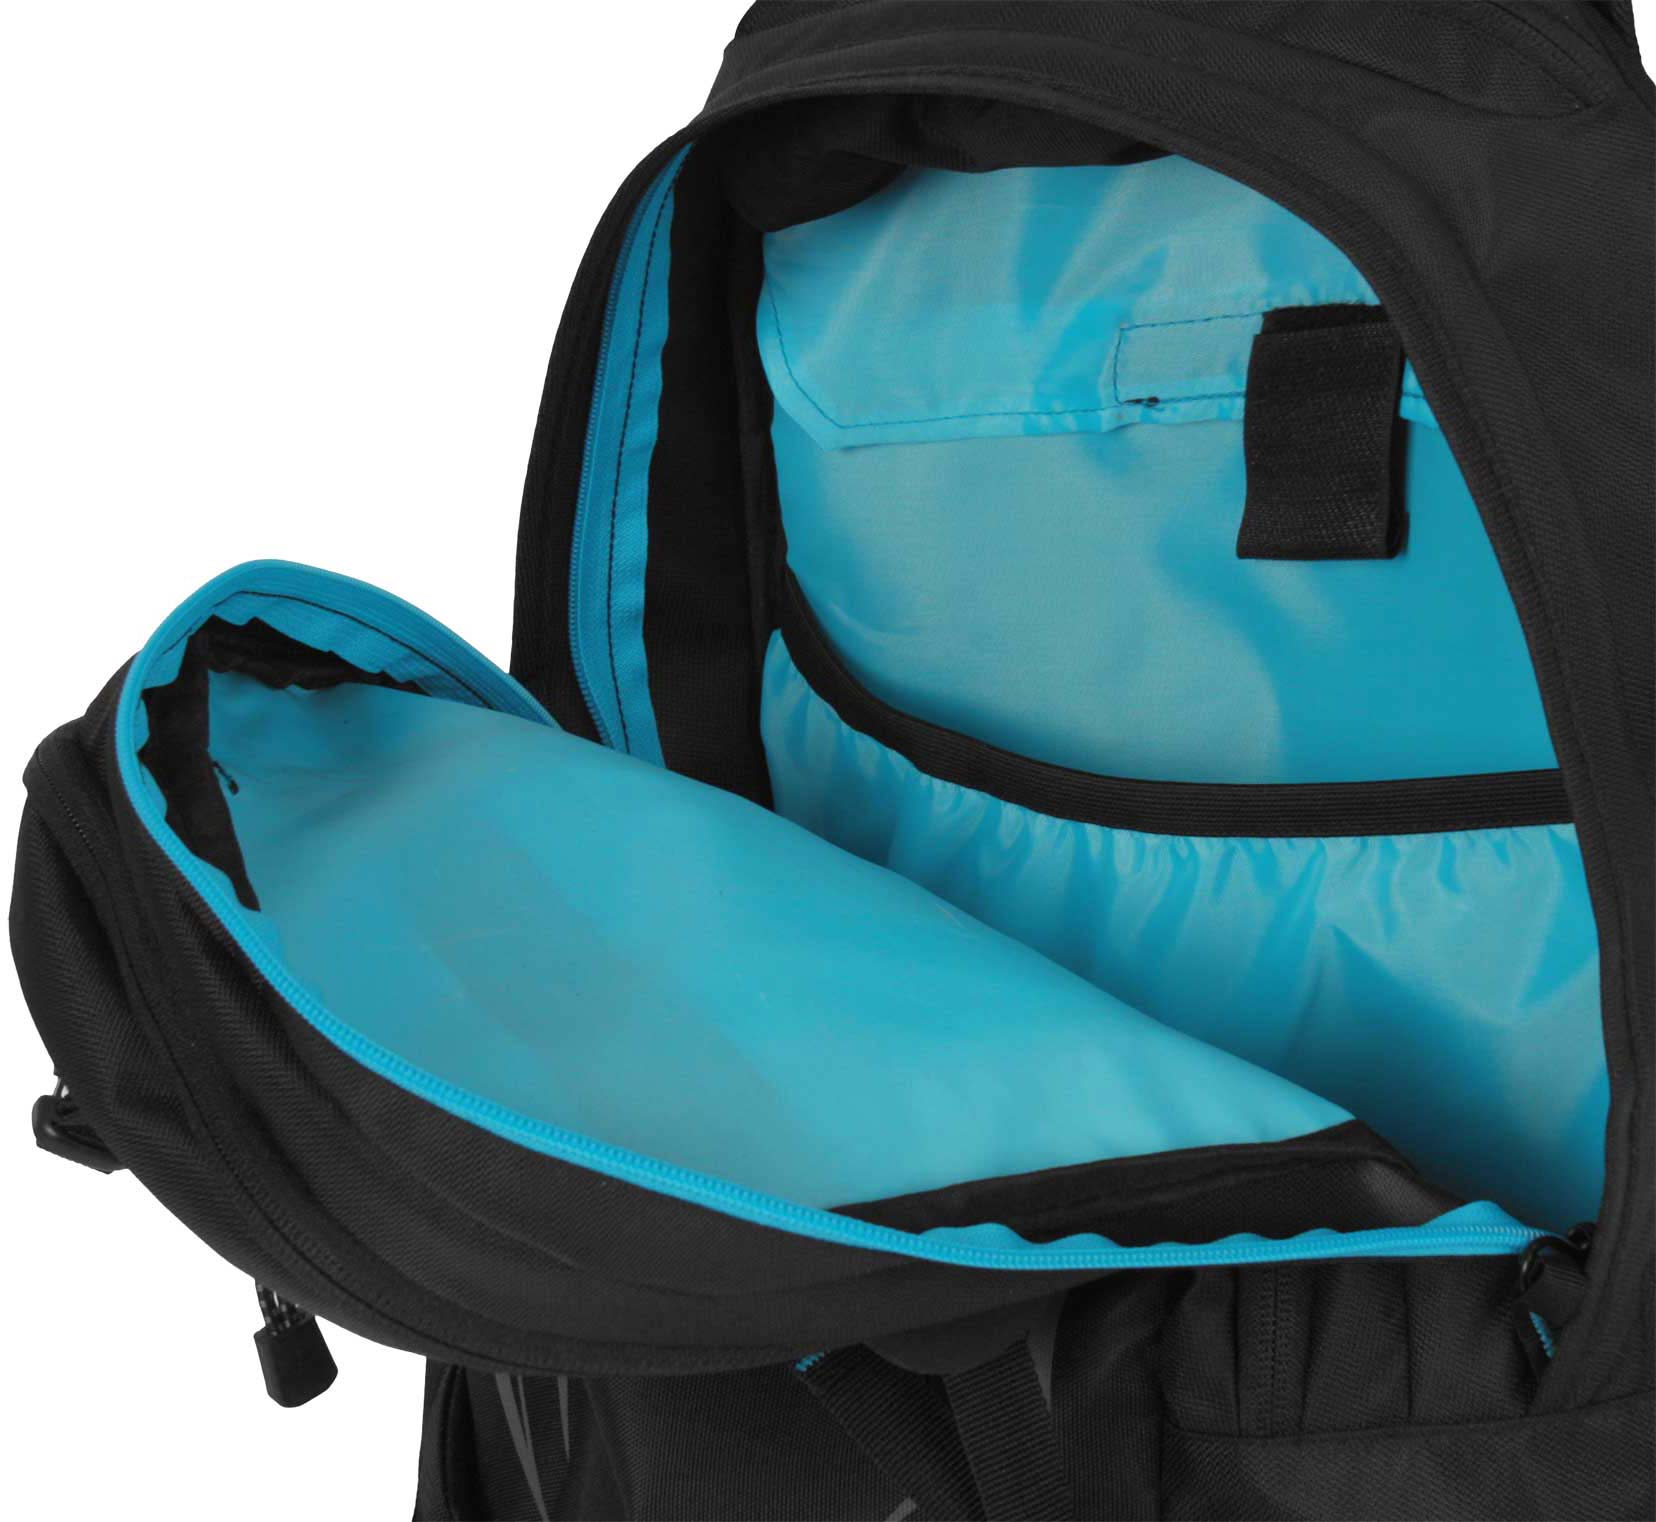 SPINETECH 31 - Ski Mountaineering Backpack